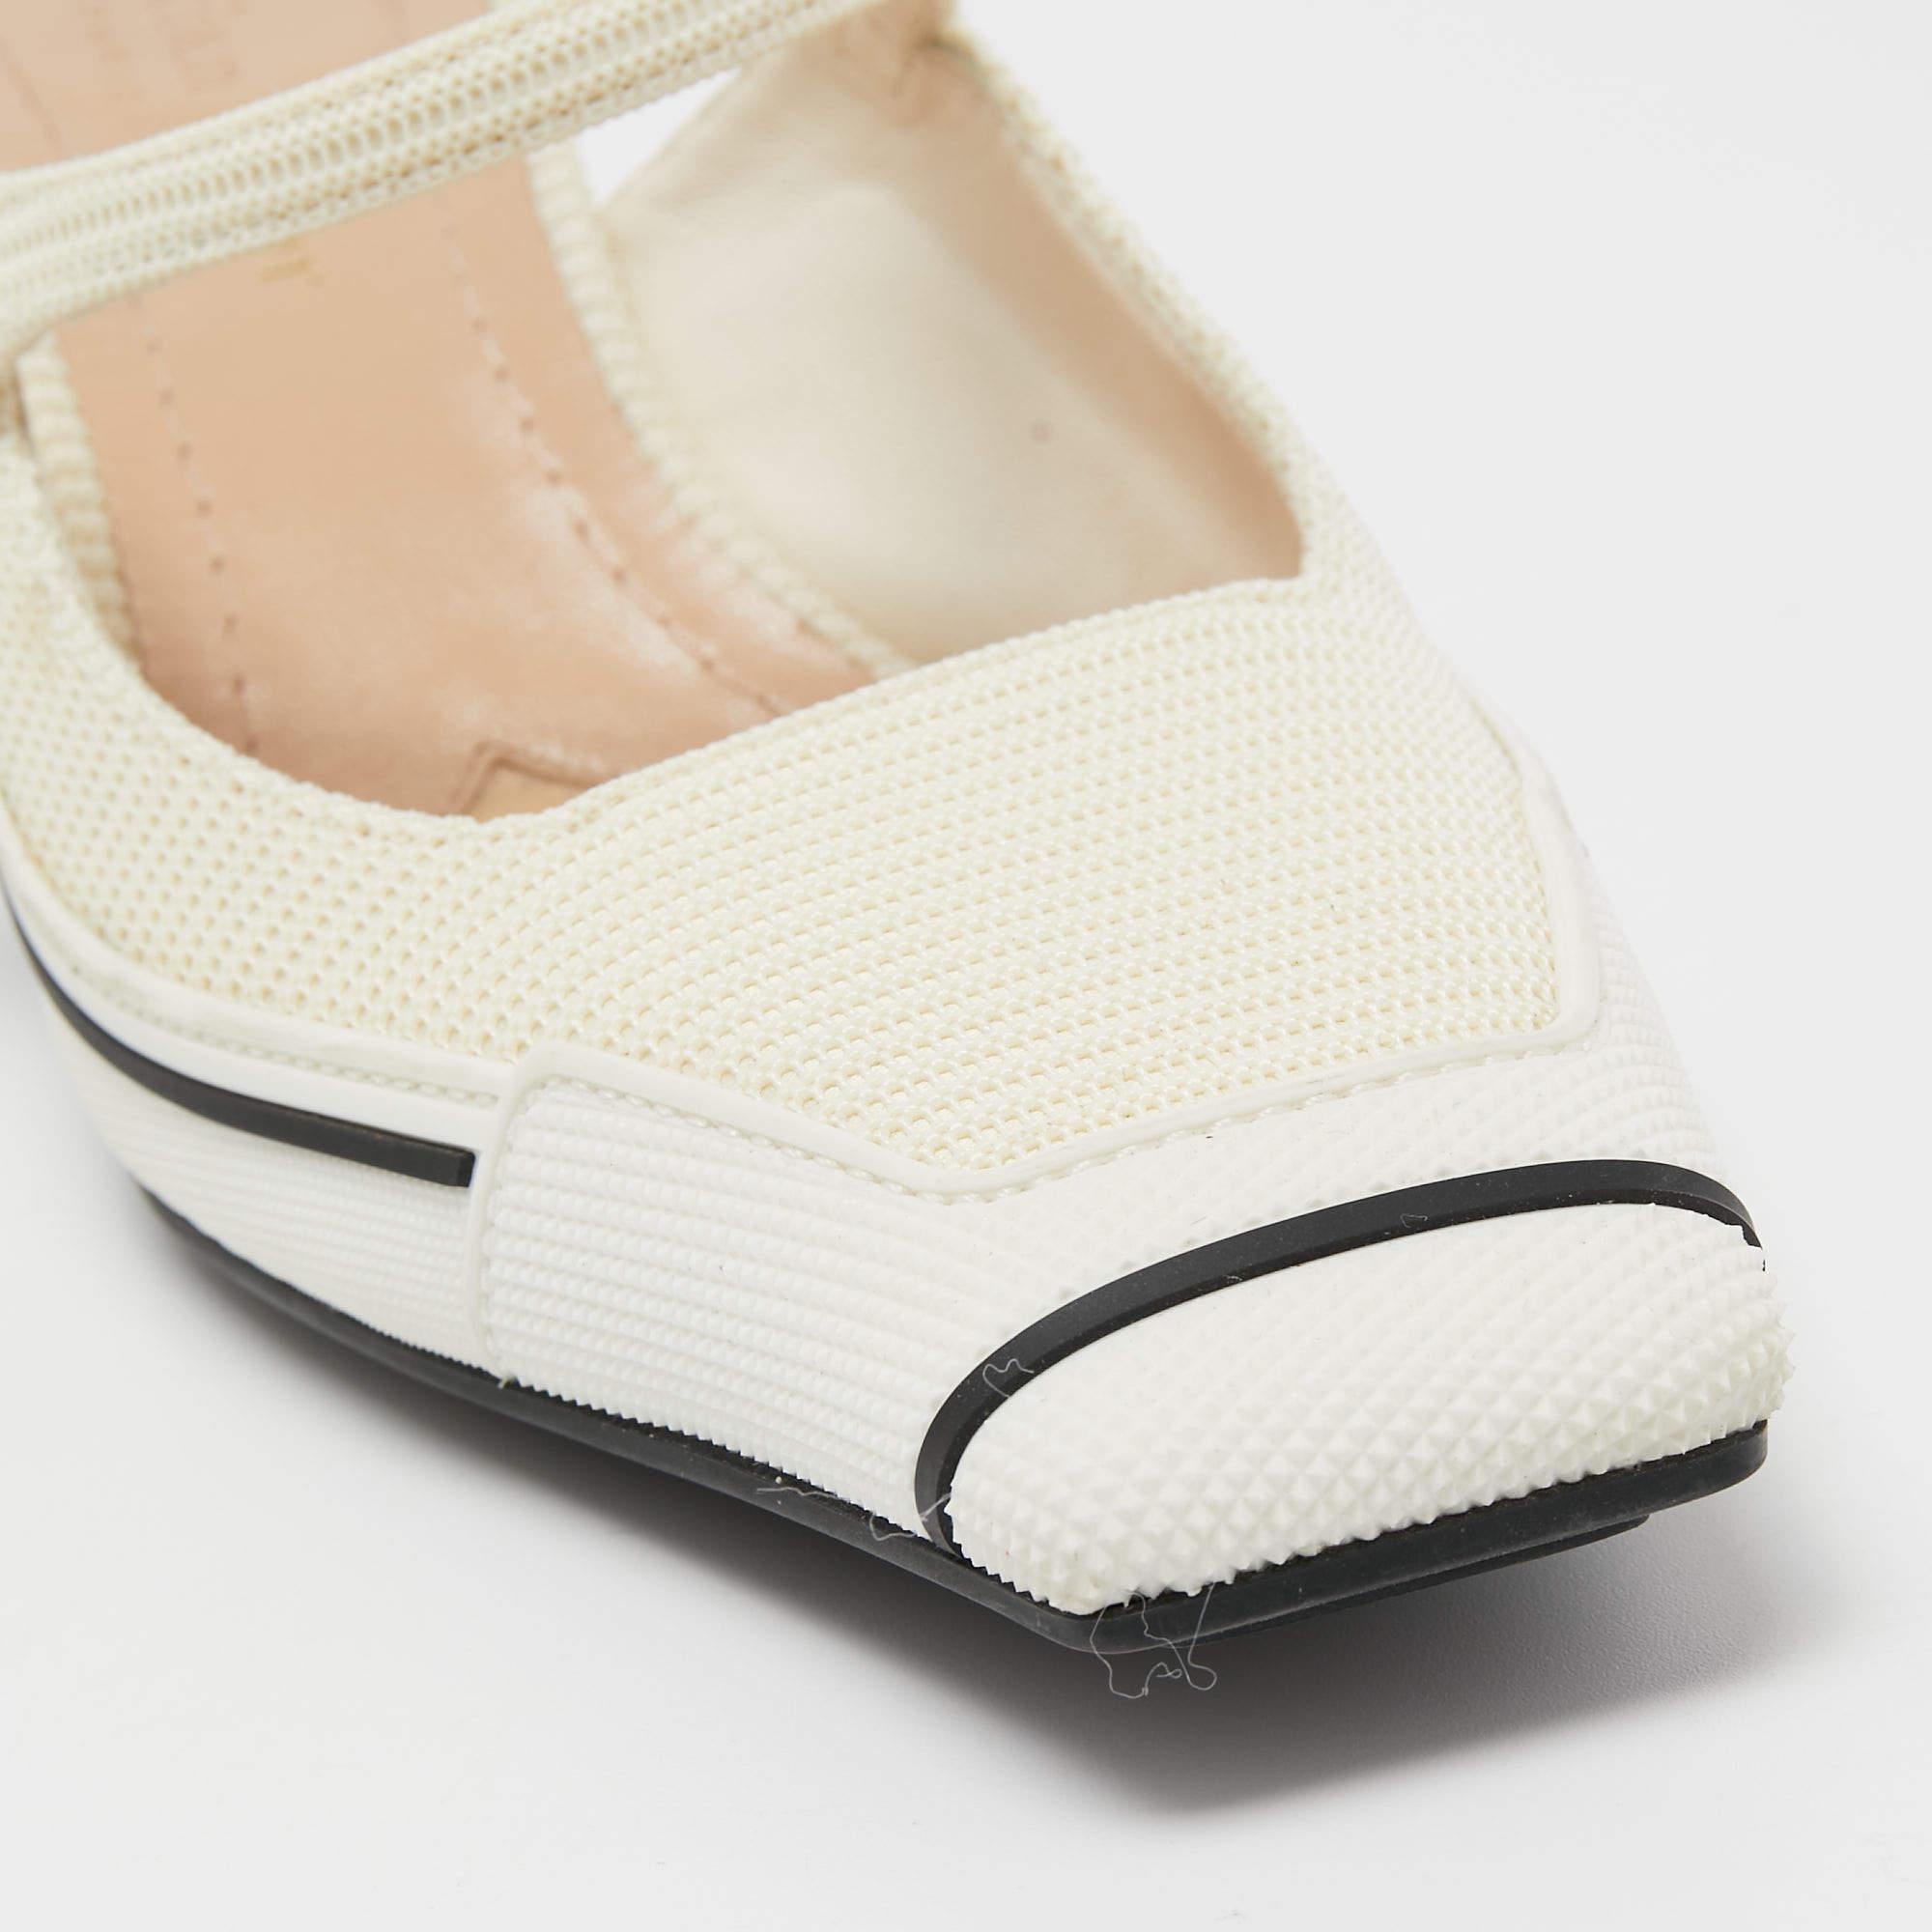 A perfect blend of luxury, style, and comfort, these designer mules are made using quality materials and frame your feet in the most elegant way. They can be paired with a host of outfits from your wardrobe.

